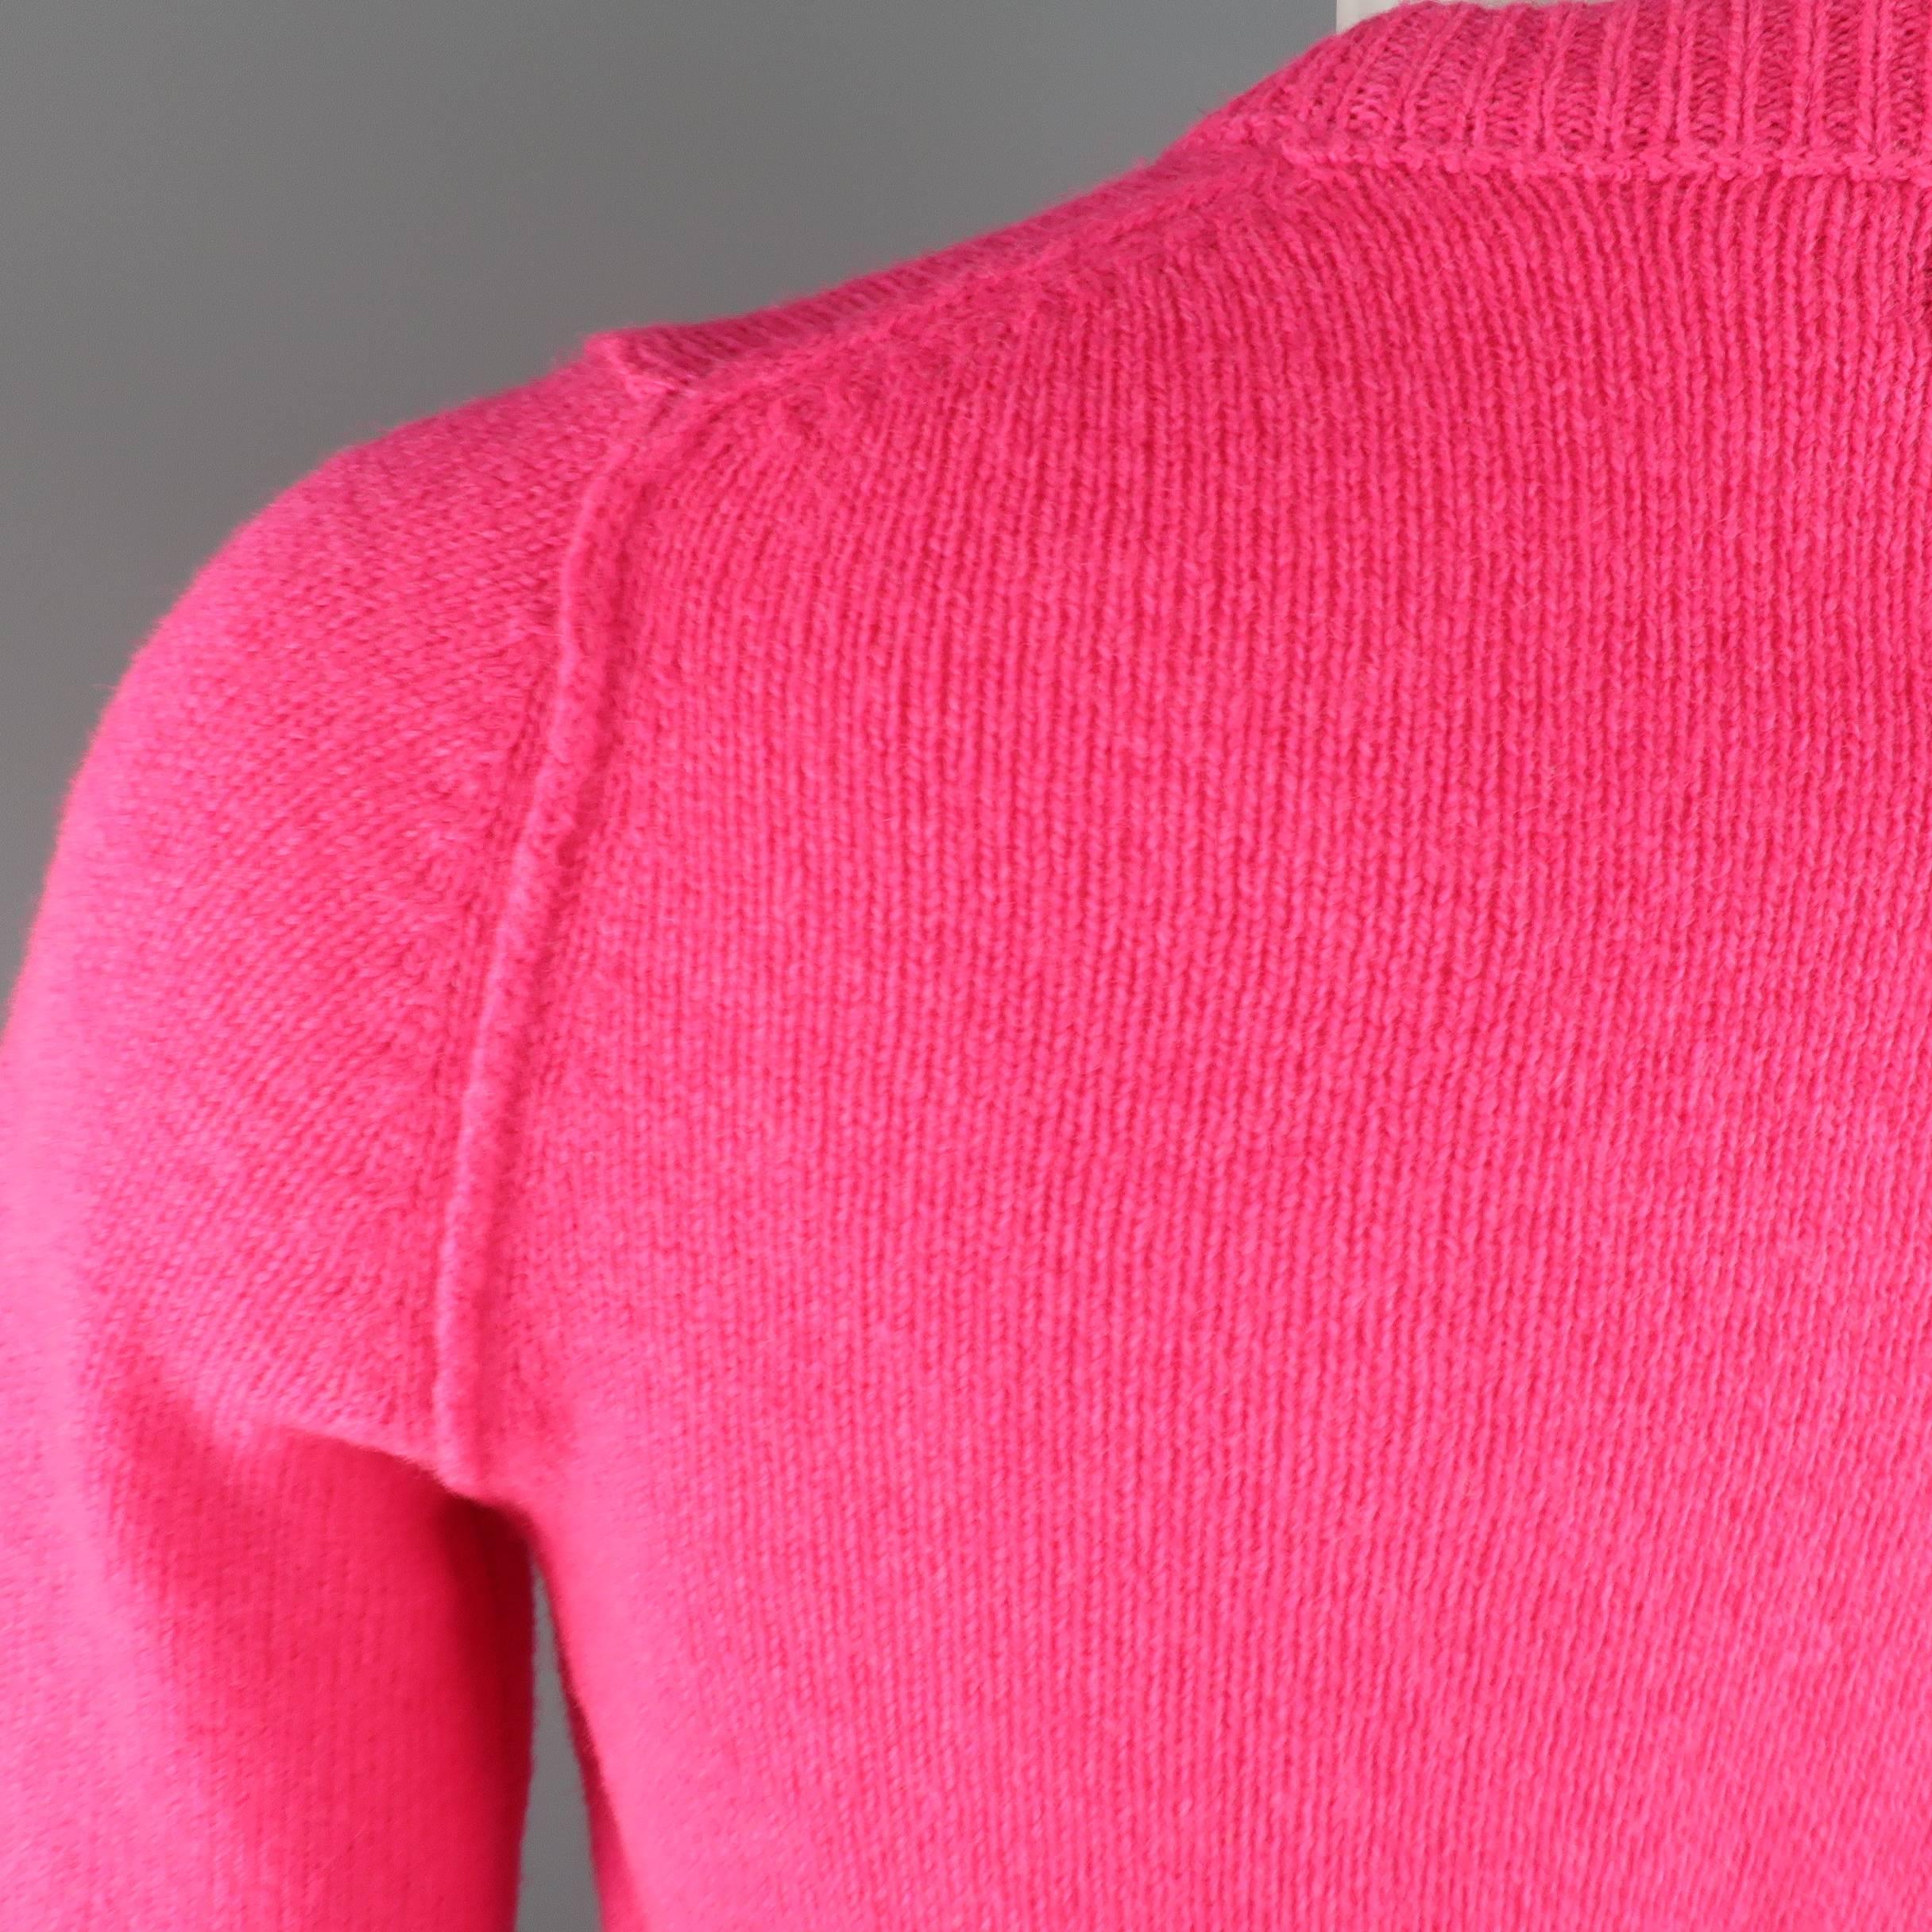 pink sweater for men